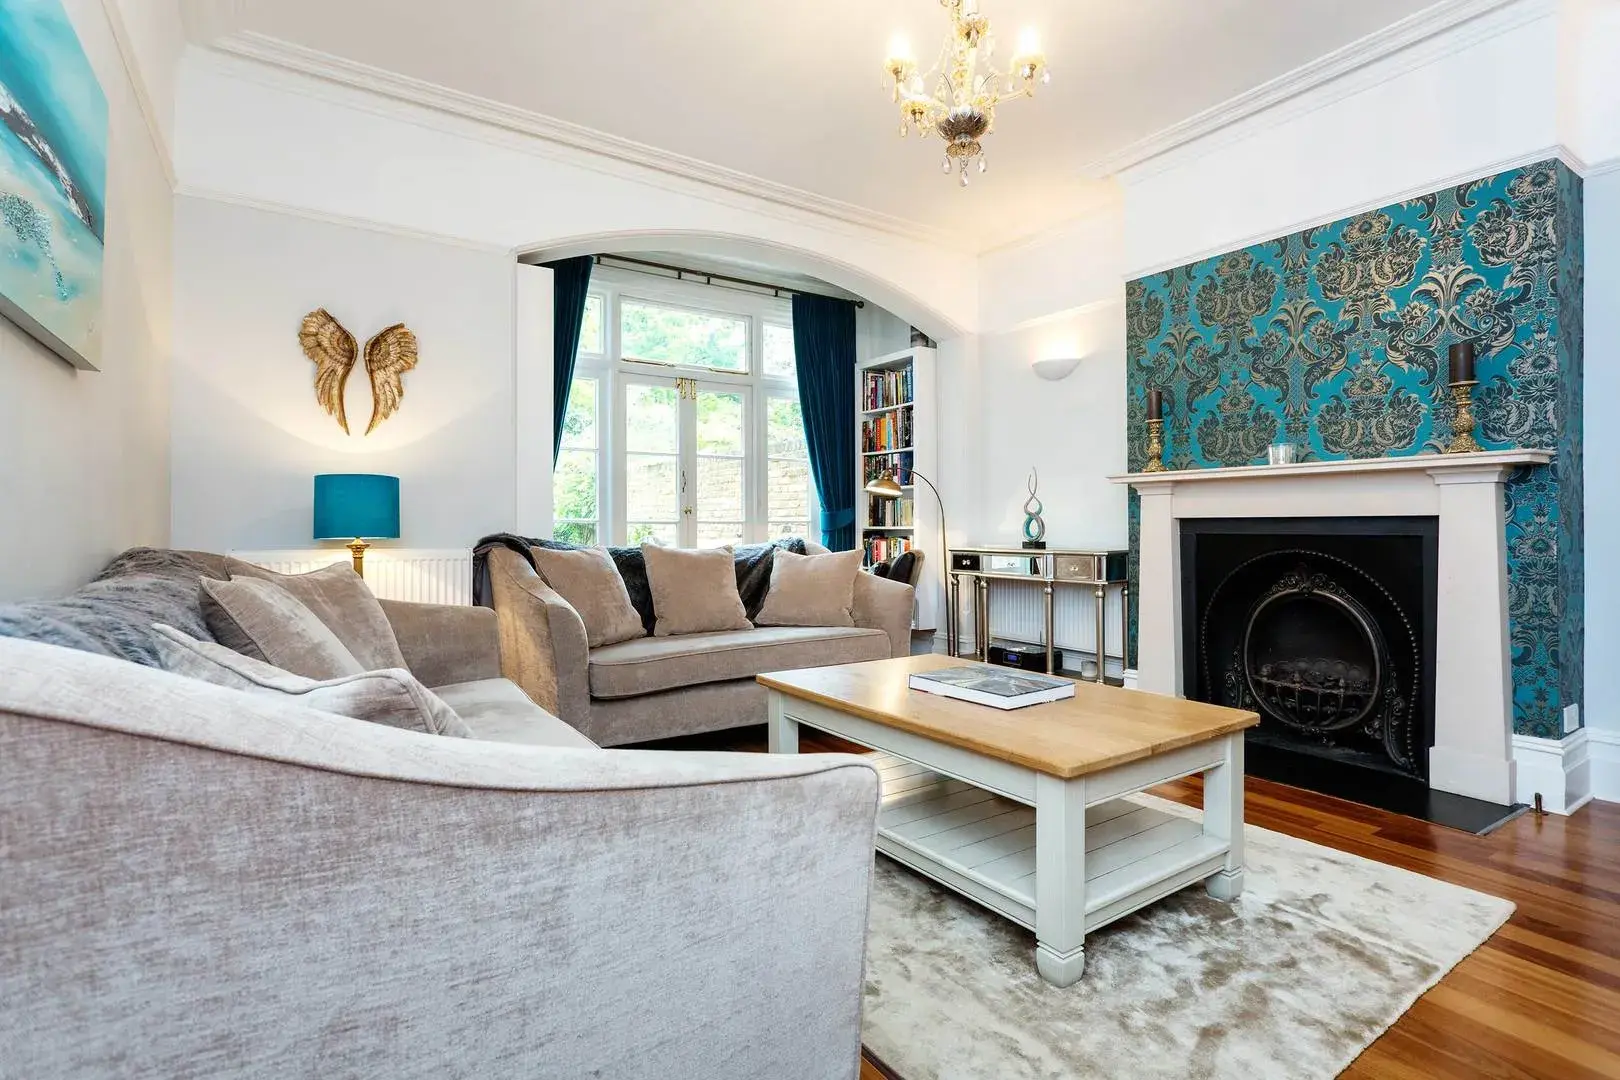 Vineyard Hill Road, holiday home in Wimbledon – South London, London